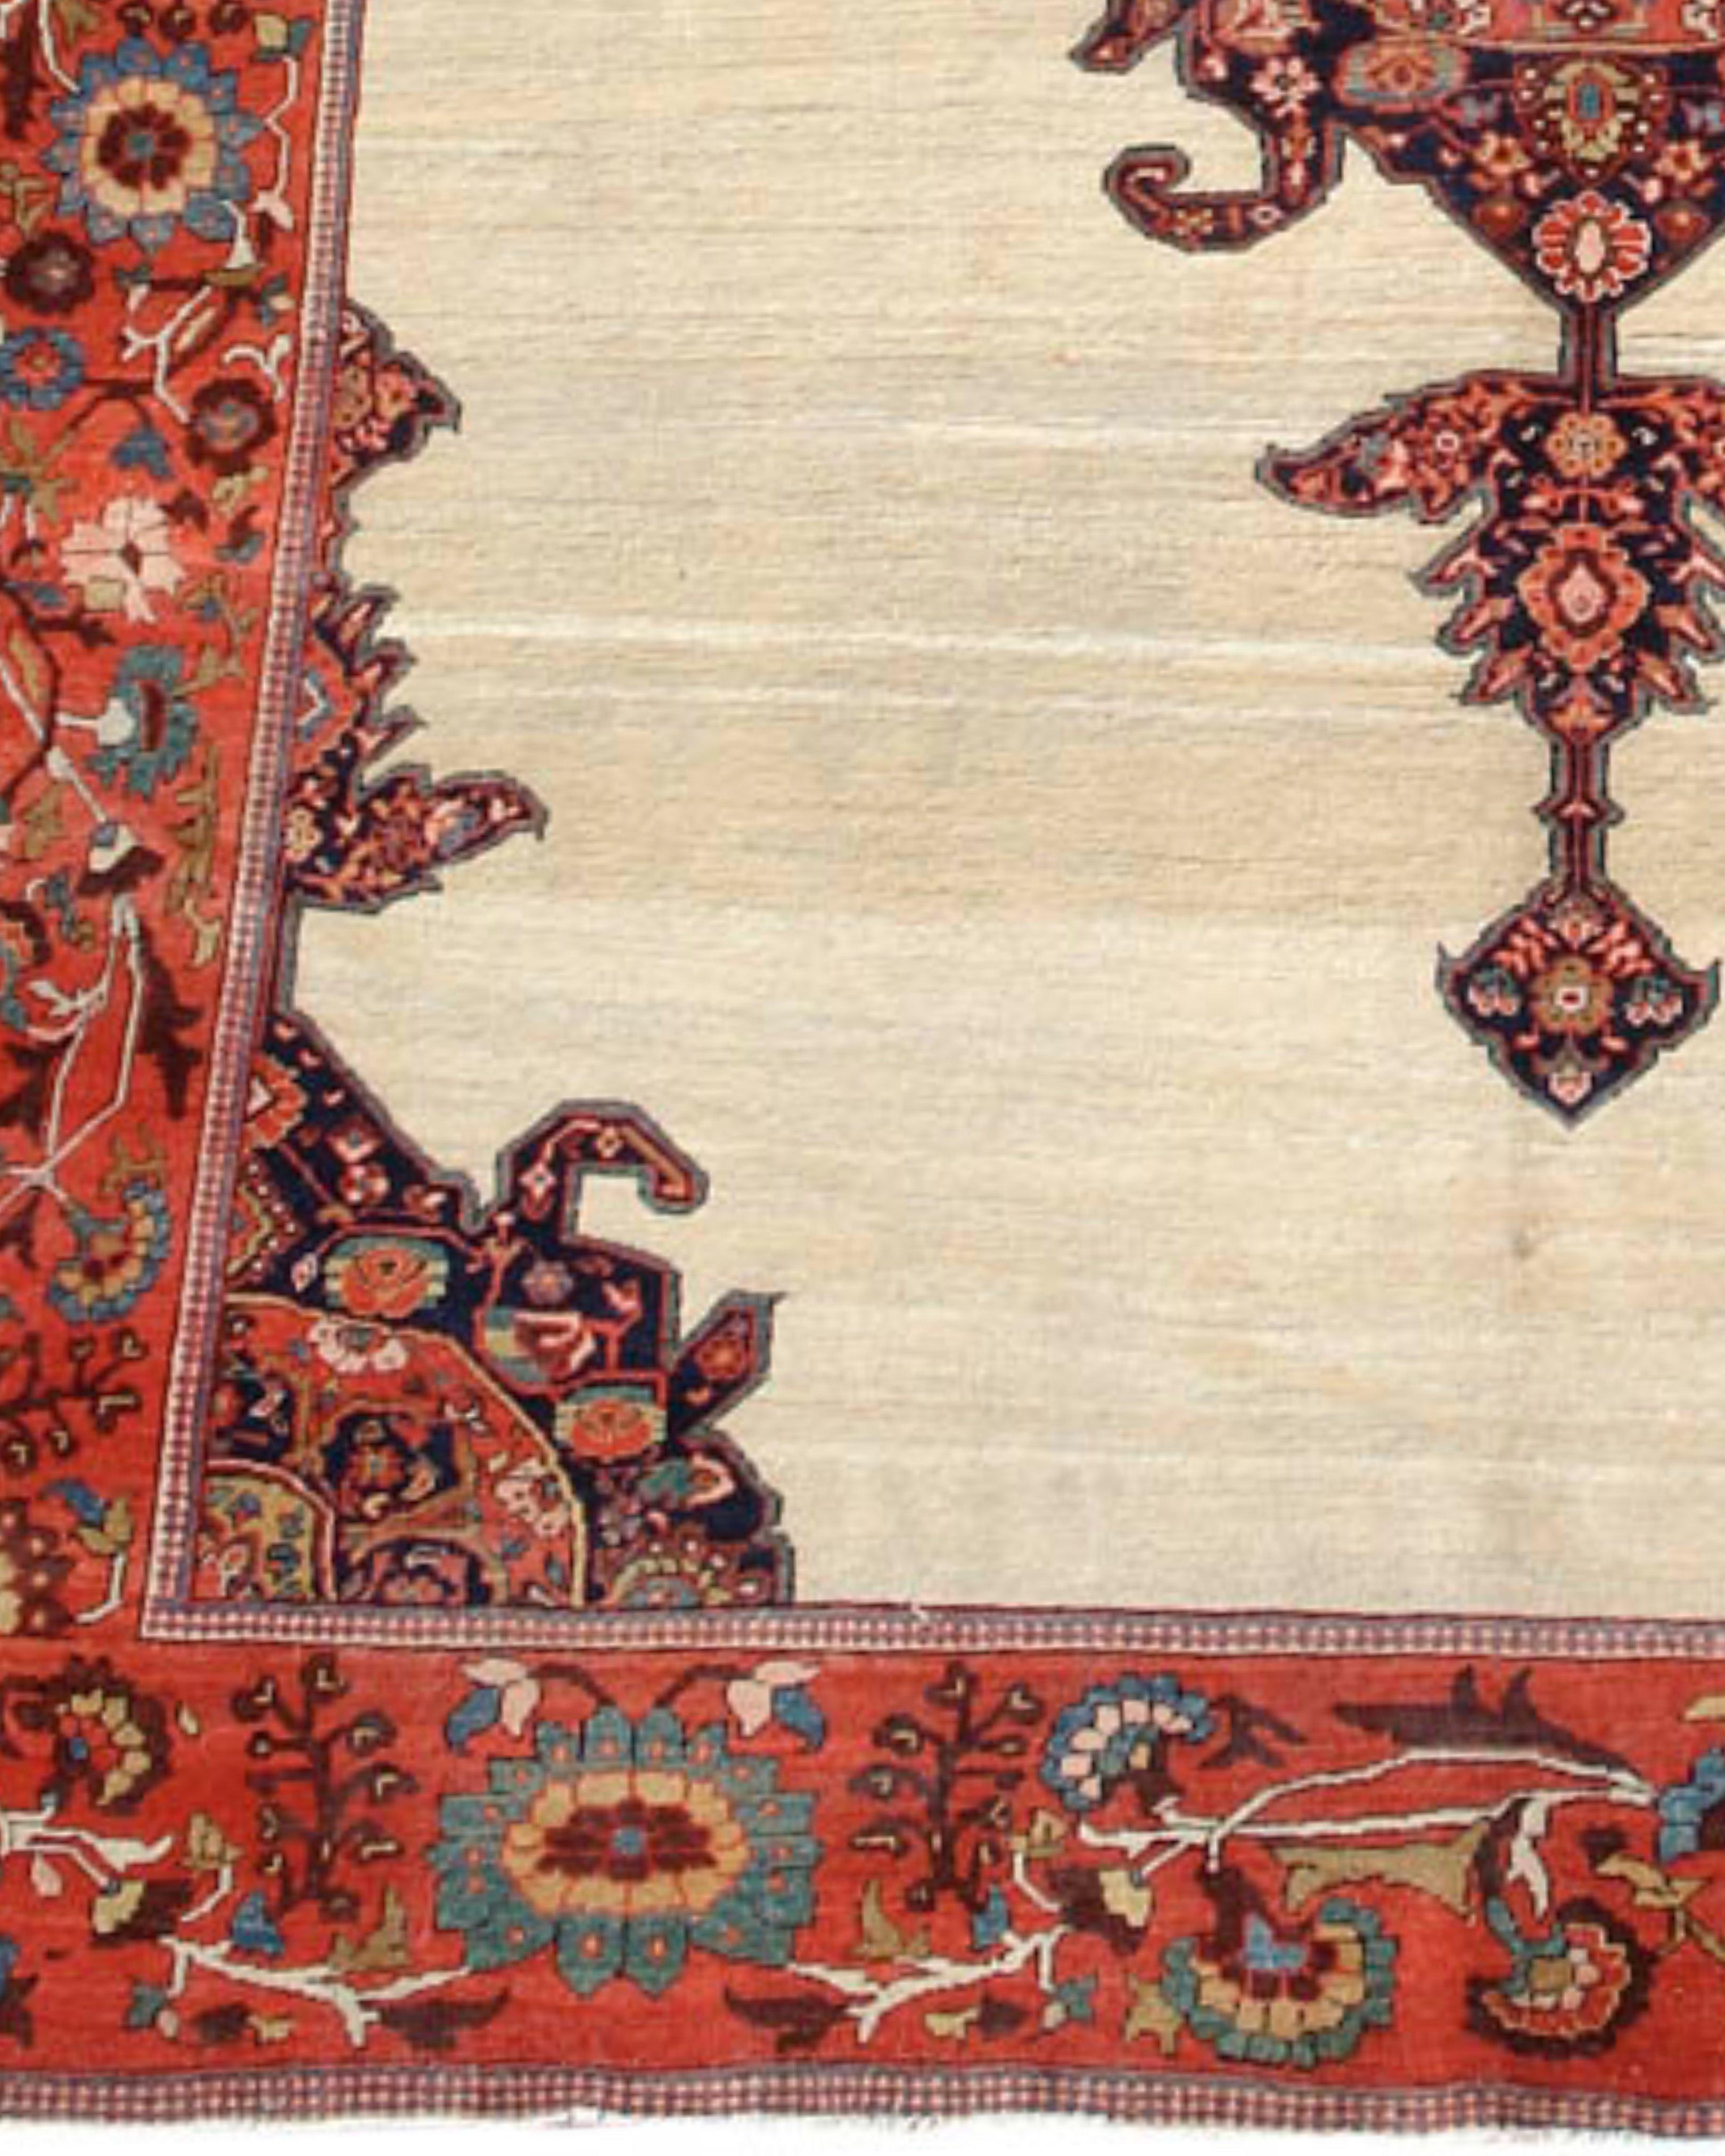 Antique Persian Fereghan Sarouk Rug, 19th Century In Excellent Condition For Sale In San Francisco, CA